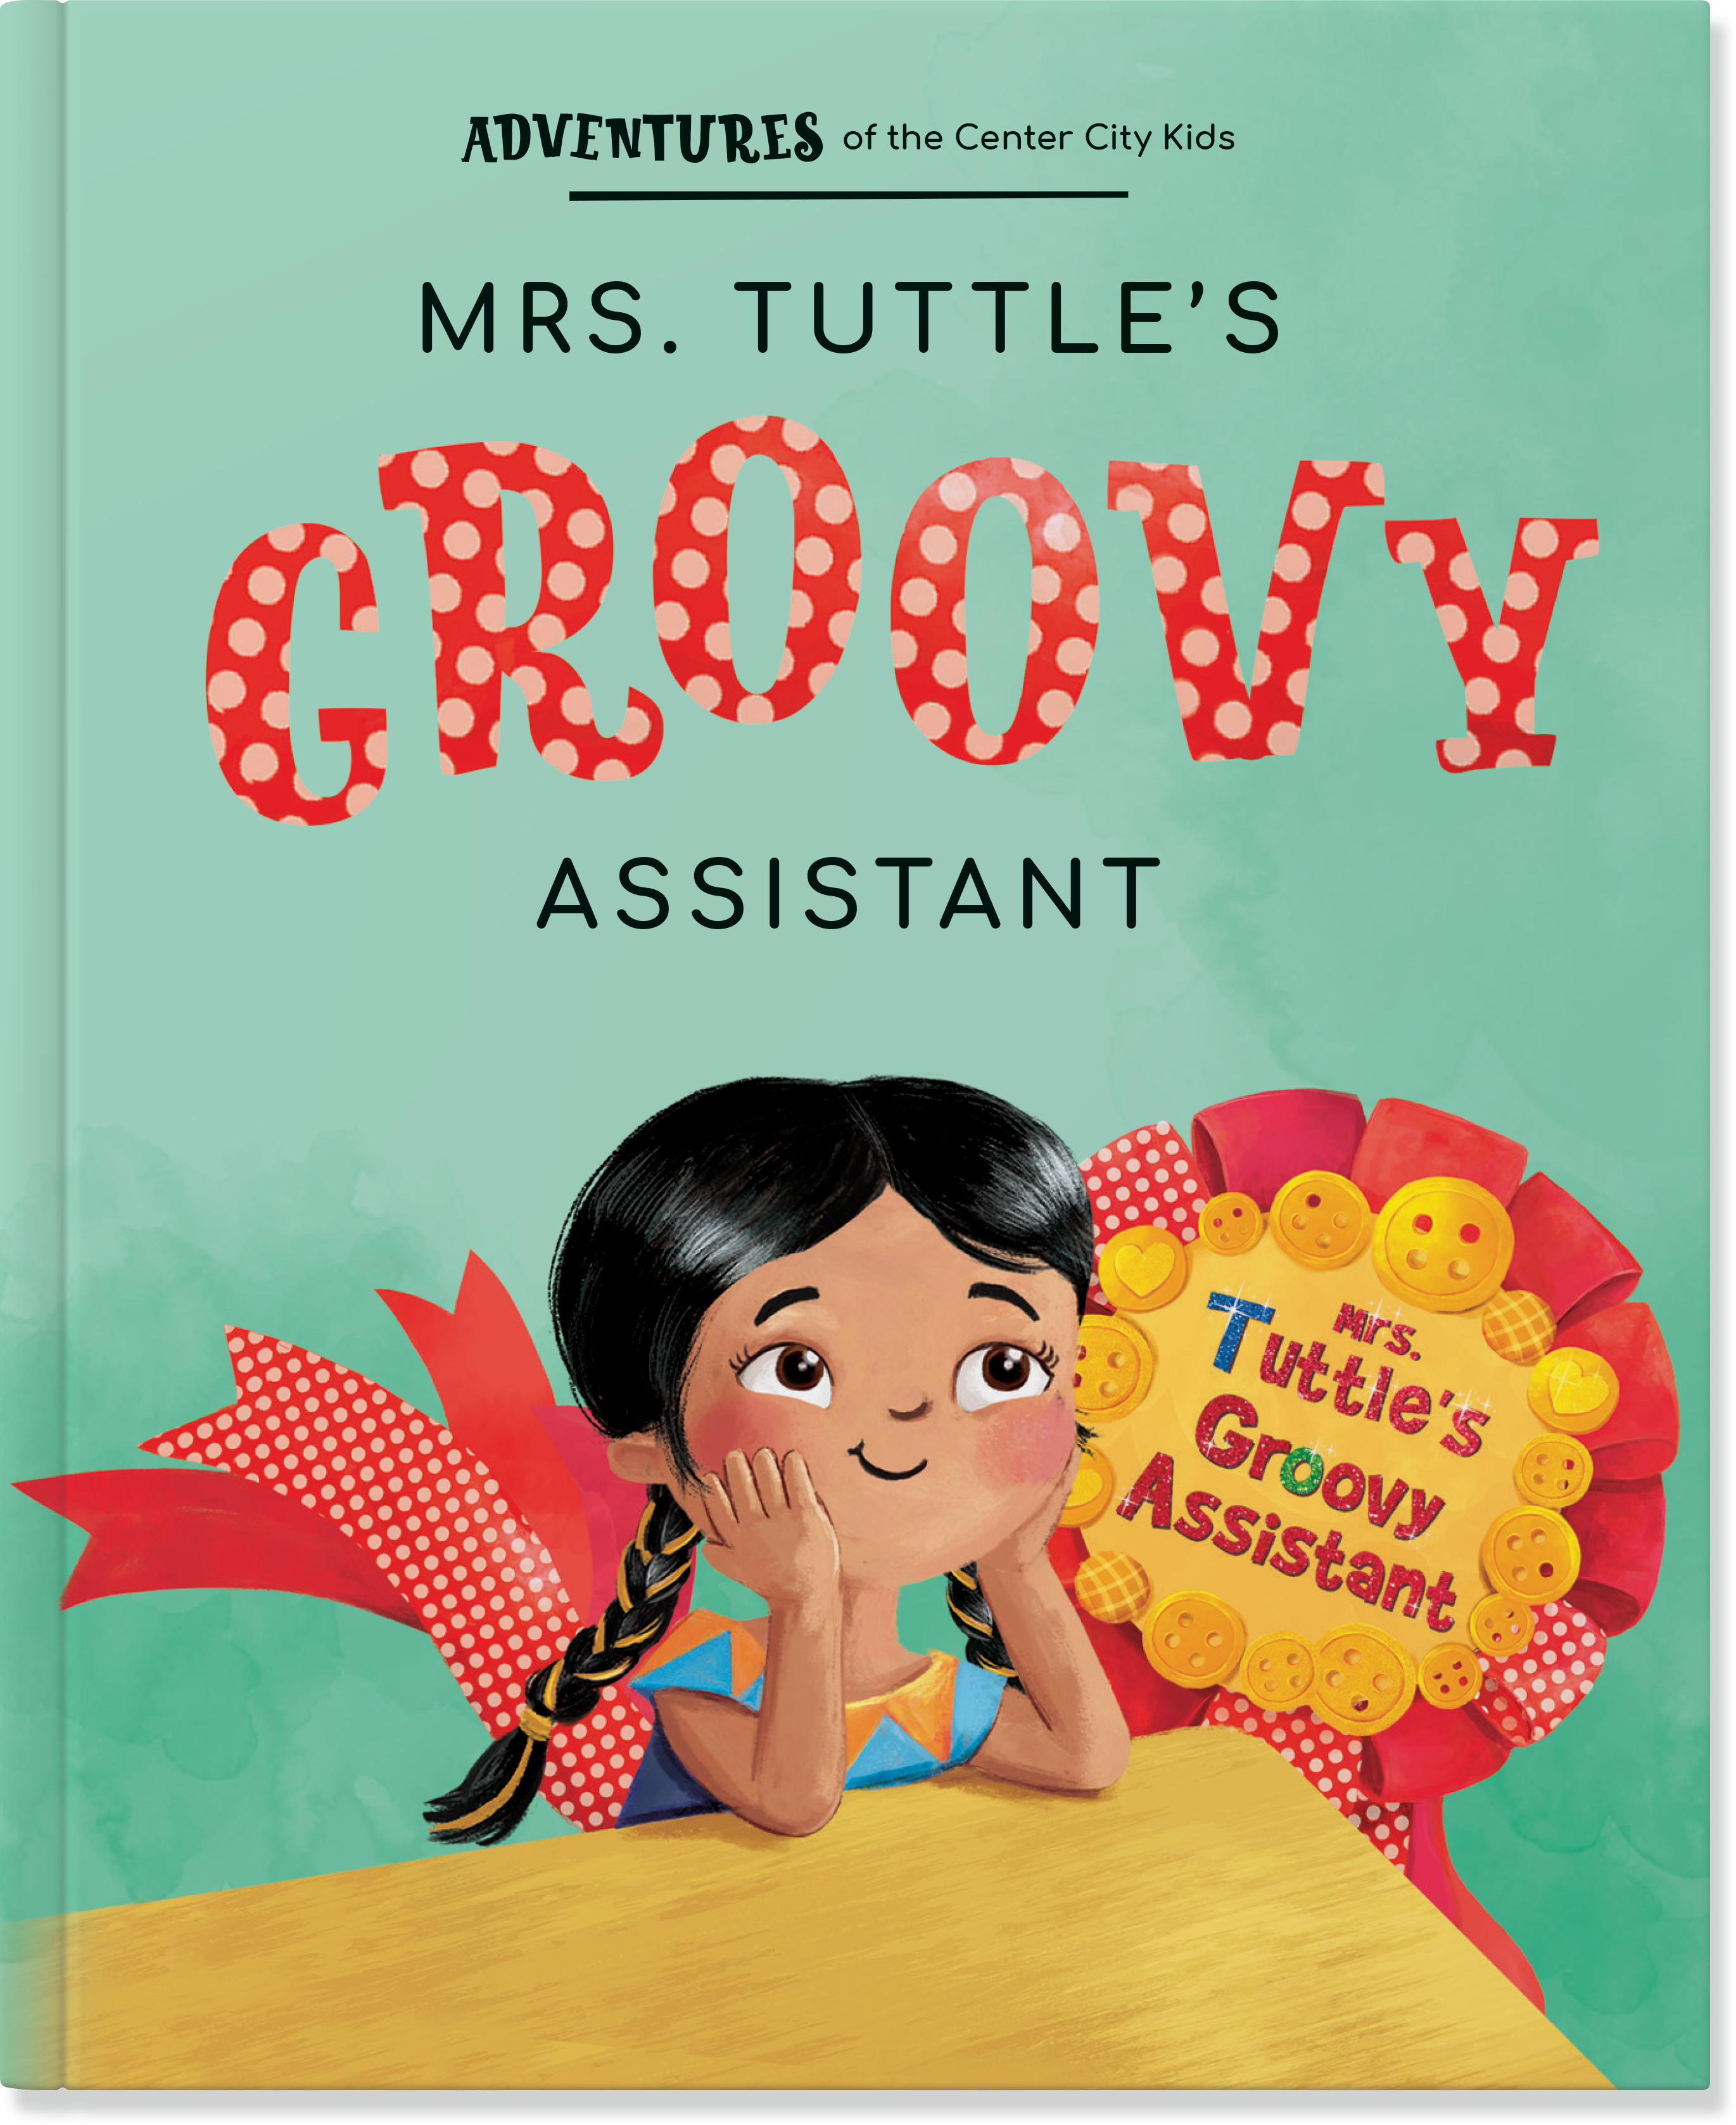 Mrs. Tuttle's Groovy Assistant